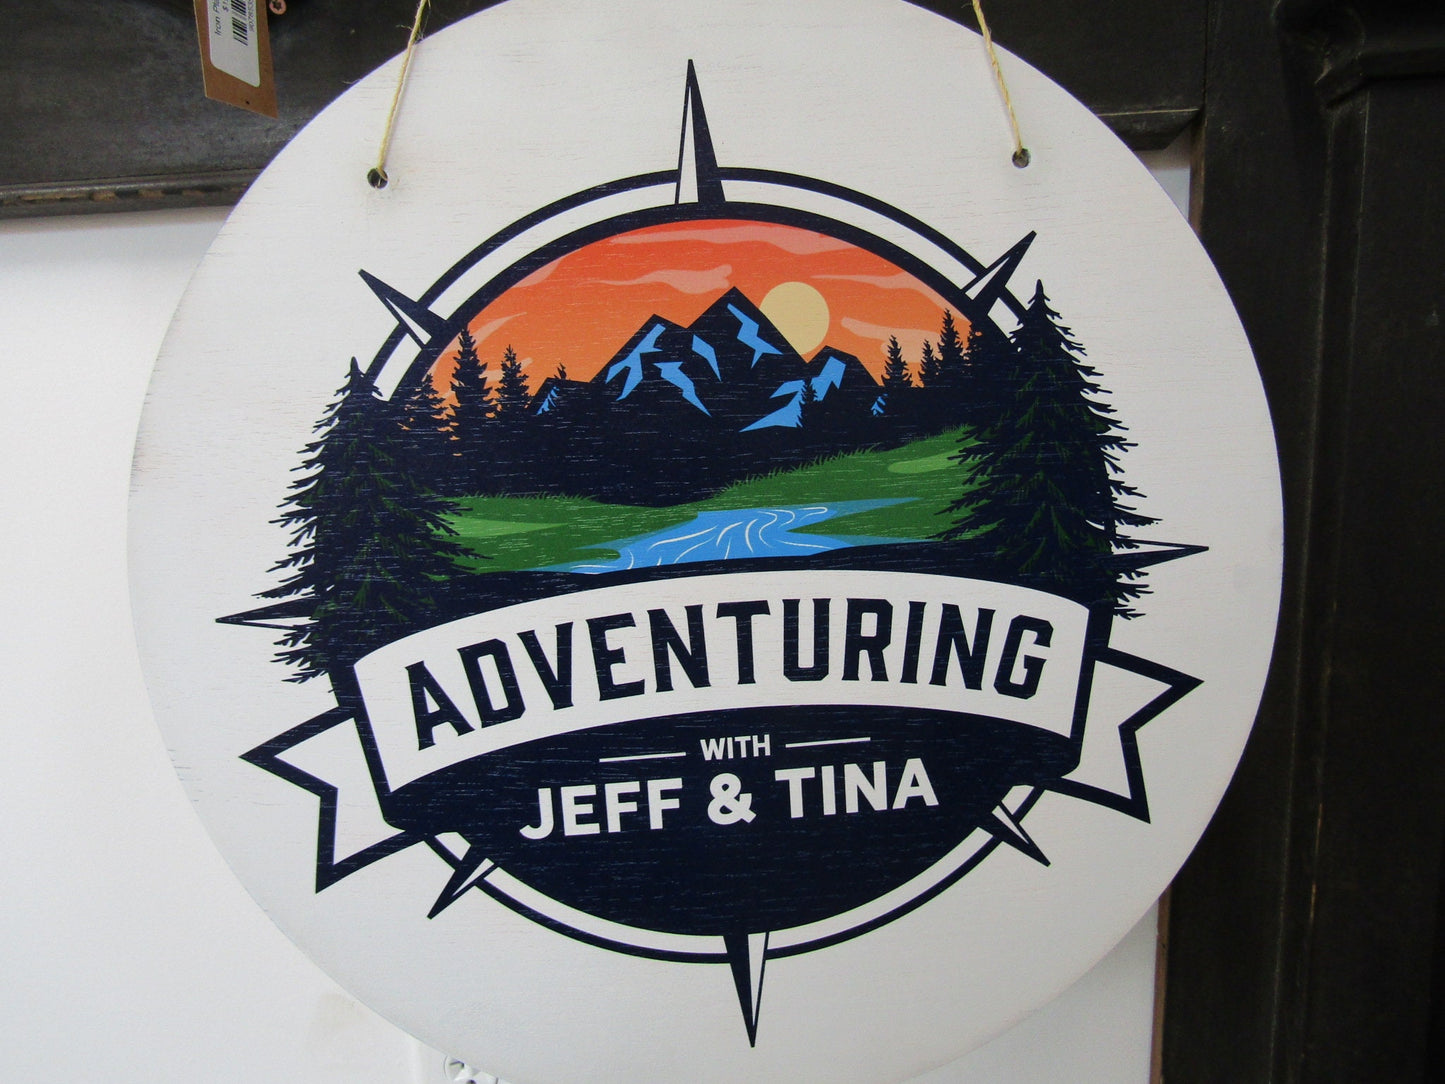 Blogger Youtuber Adventuring With Compass Wilderness Outdoors Camping Rv Hanging Sign Personalized Custom Round Circle Signage Gift Vanlife